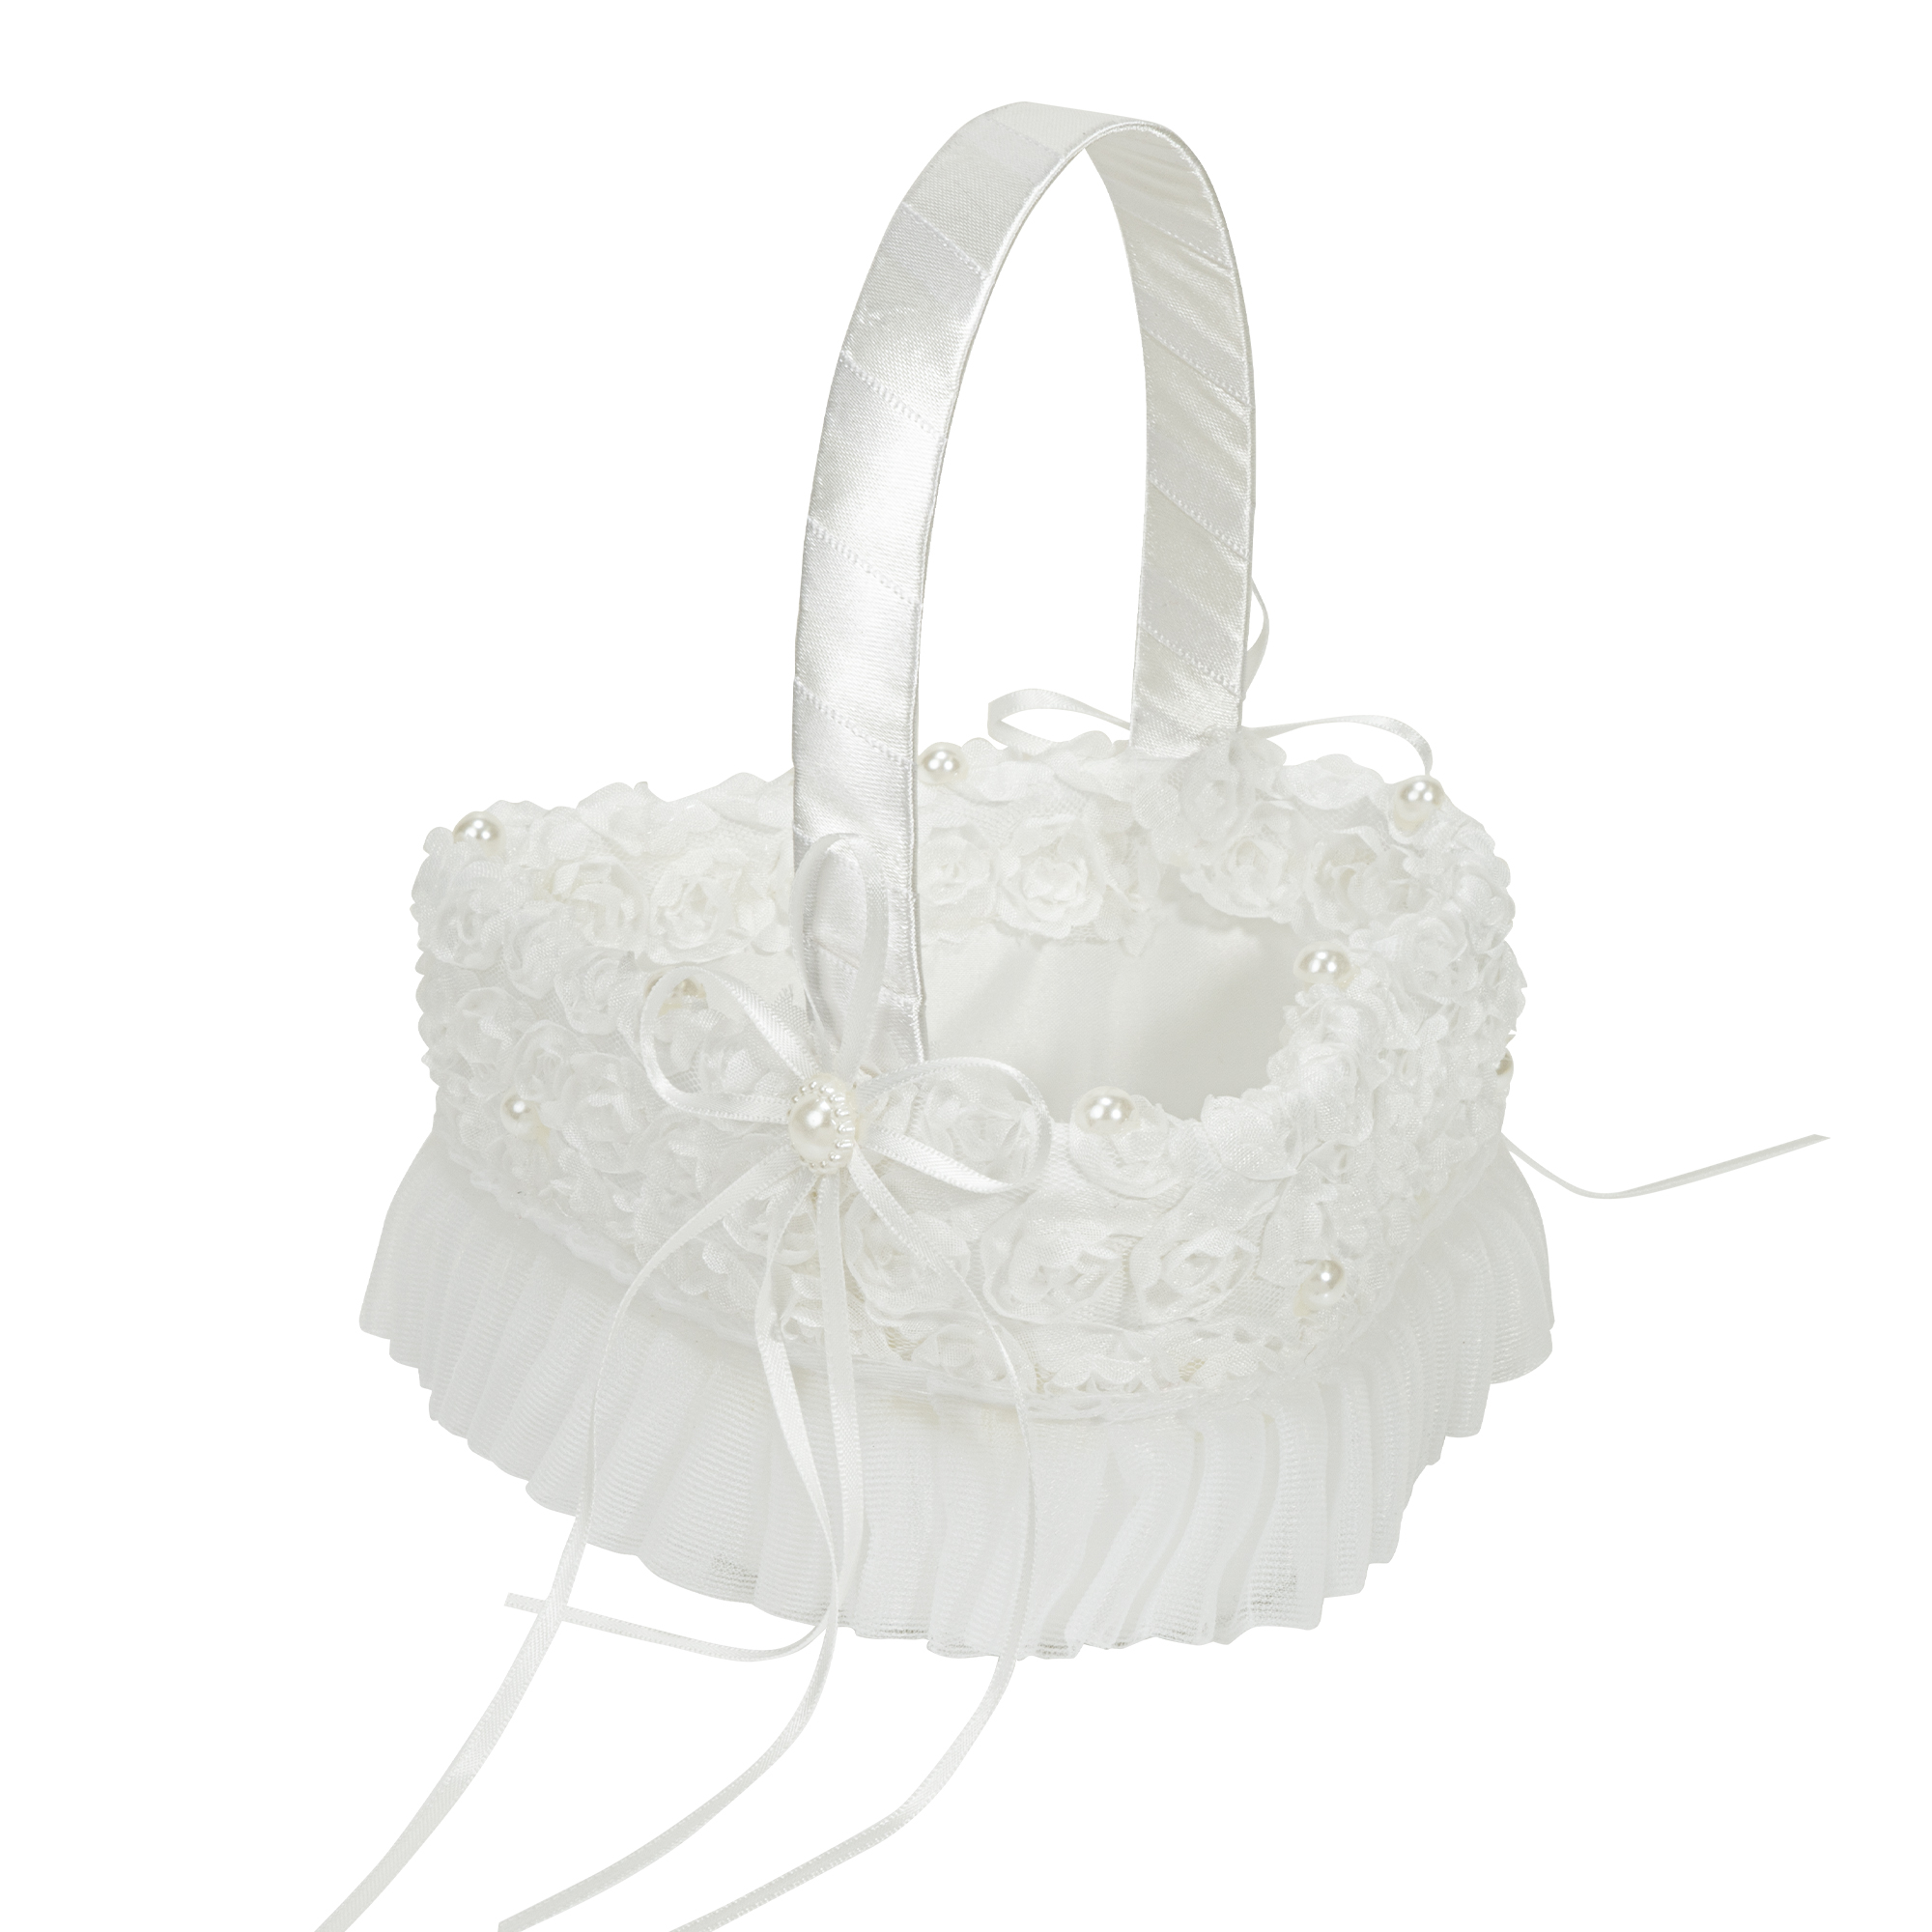 Heart Wedding Basket with Pearl Accent - White